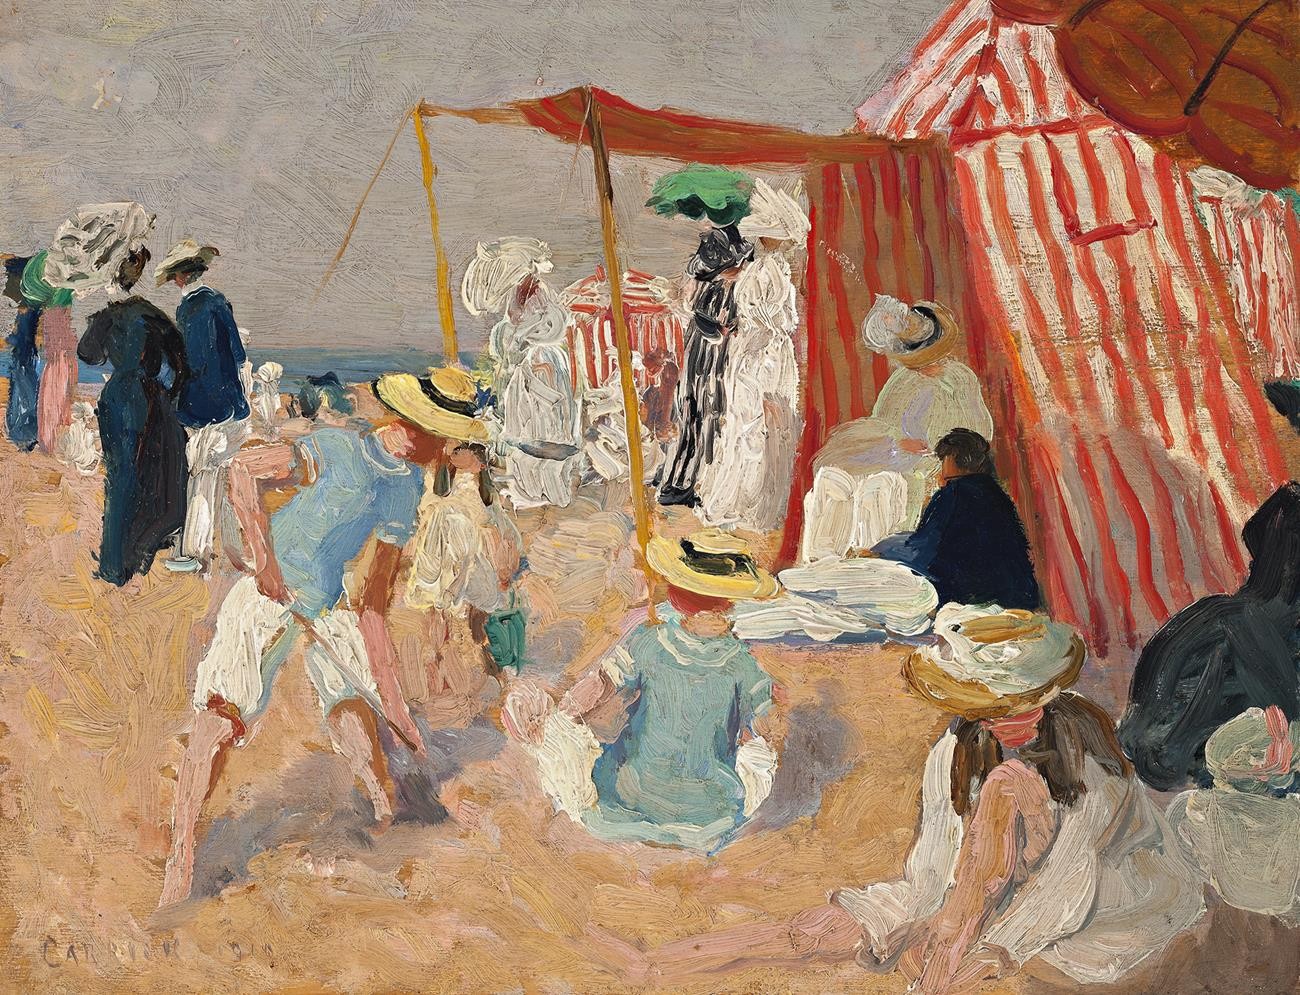 On the Beach by Ethel Carrick Fox - 1910 - 27.0 x 35.0 cm private collection